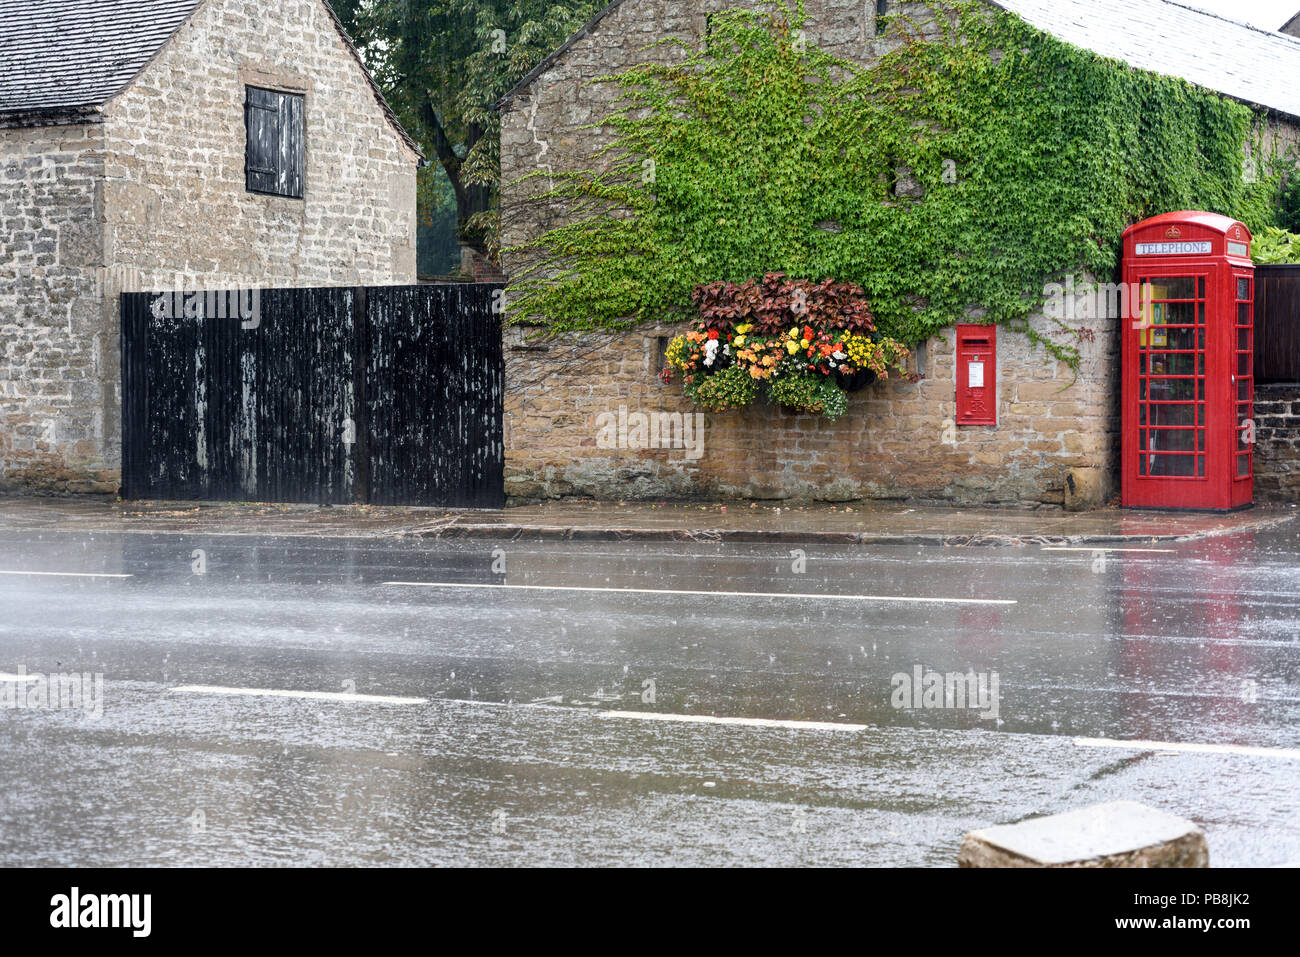 Linby, Nottinghamshire, UK. 27th July 2018: After over two months with very little rain parts of the East Midlands are seeing heavy downpours and thunderstorms this morning. Rain flows along Main street in Linby village. Credit: Ian Francis/Alamy Live News Stock Photo